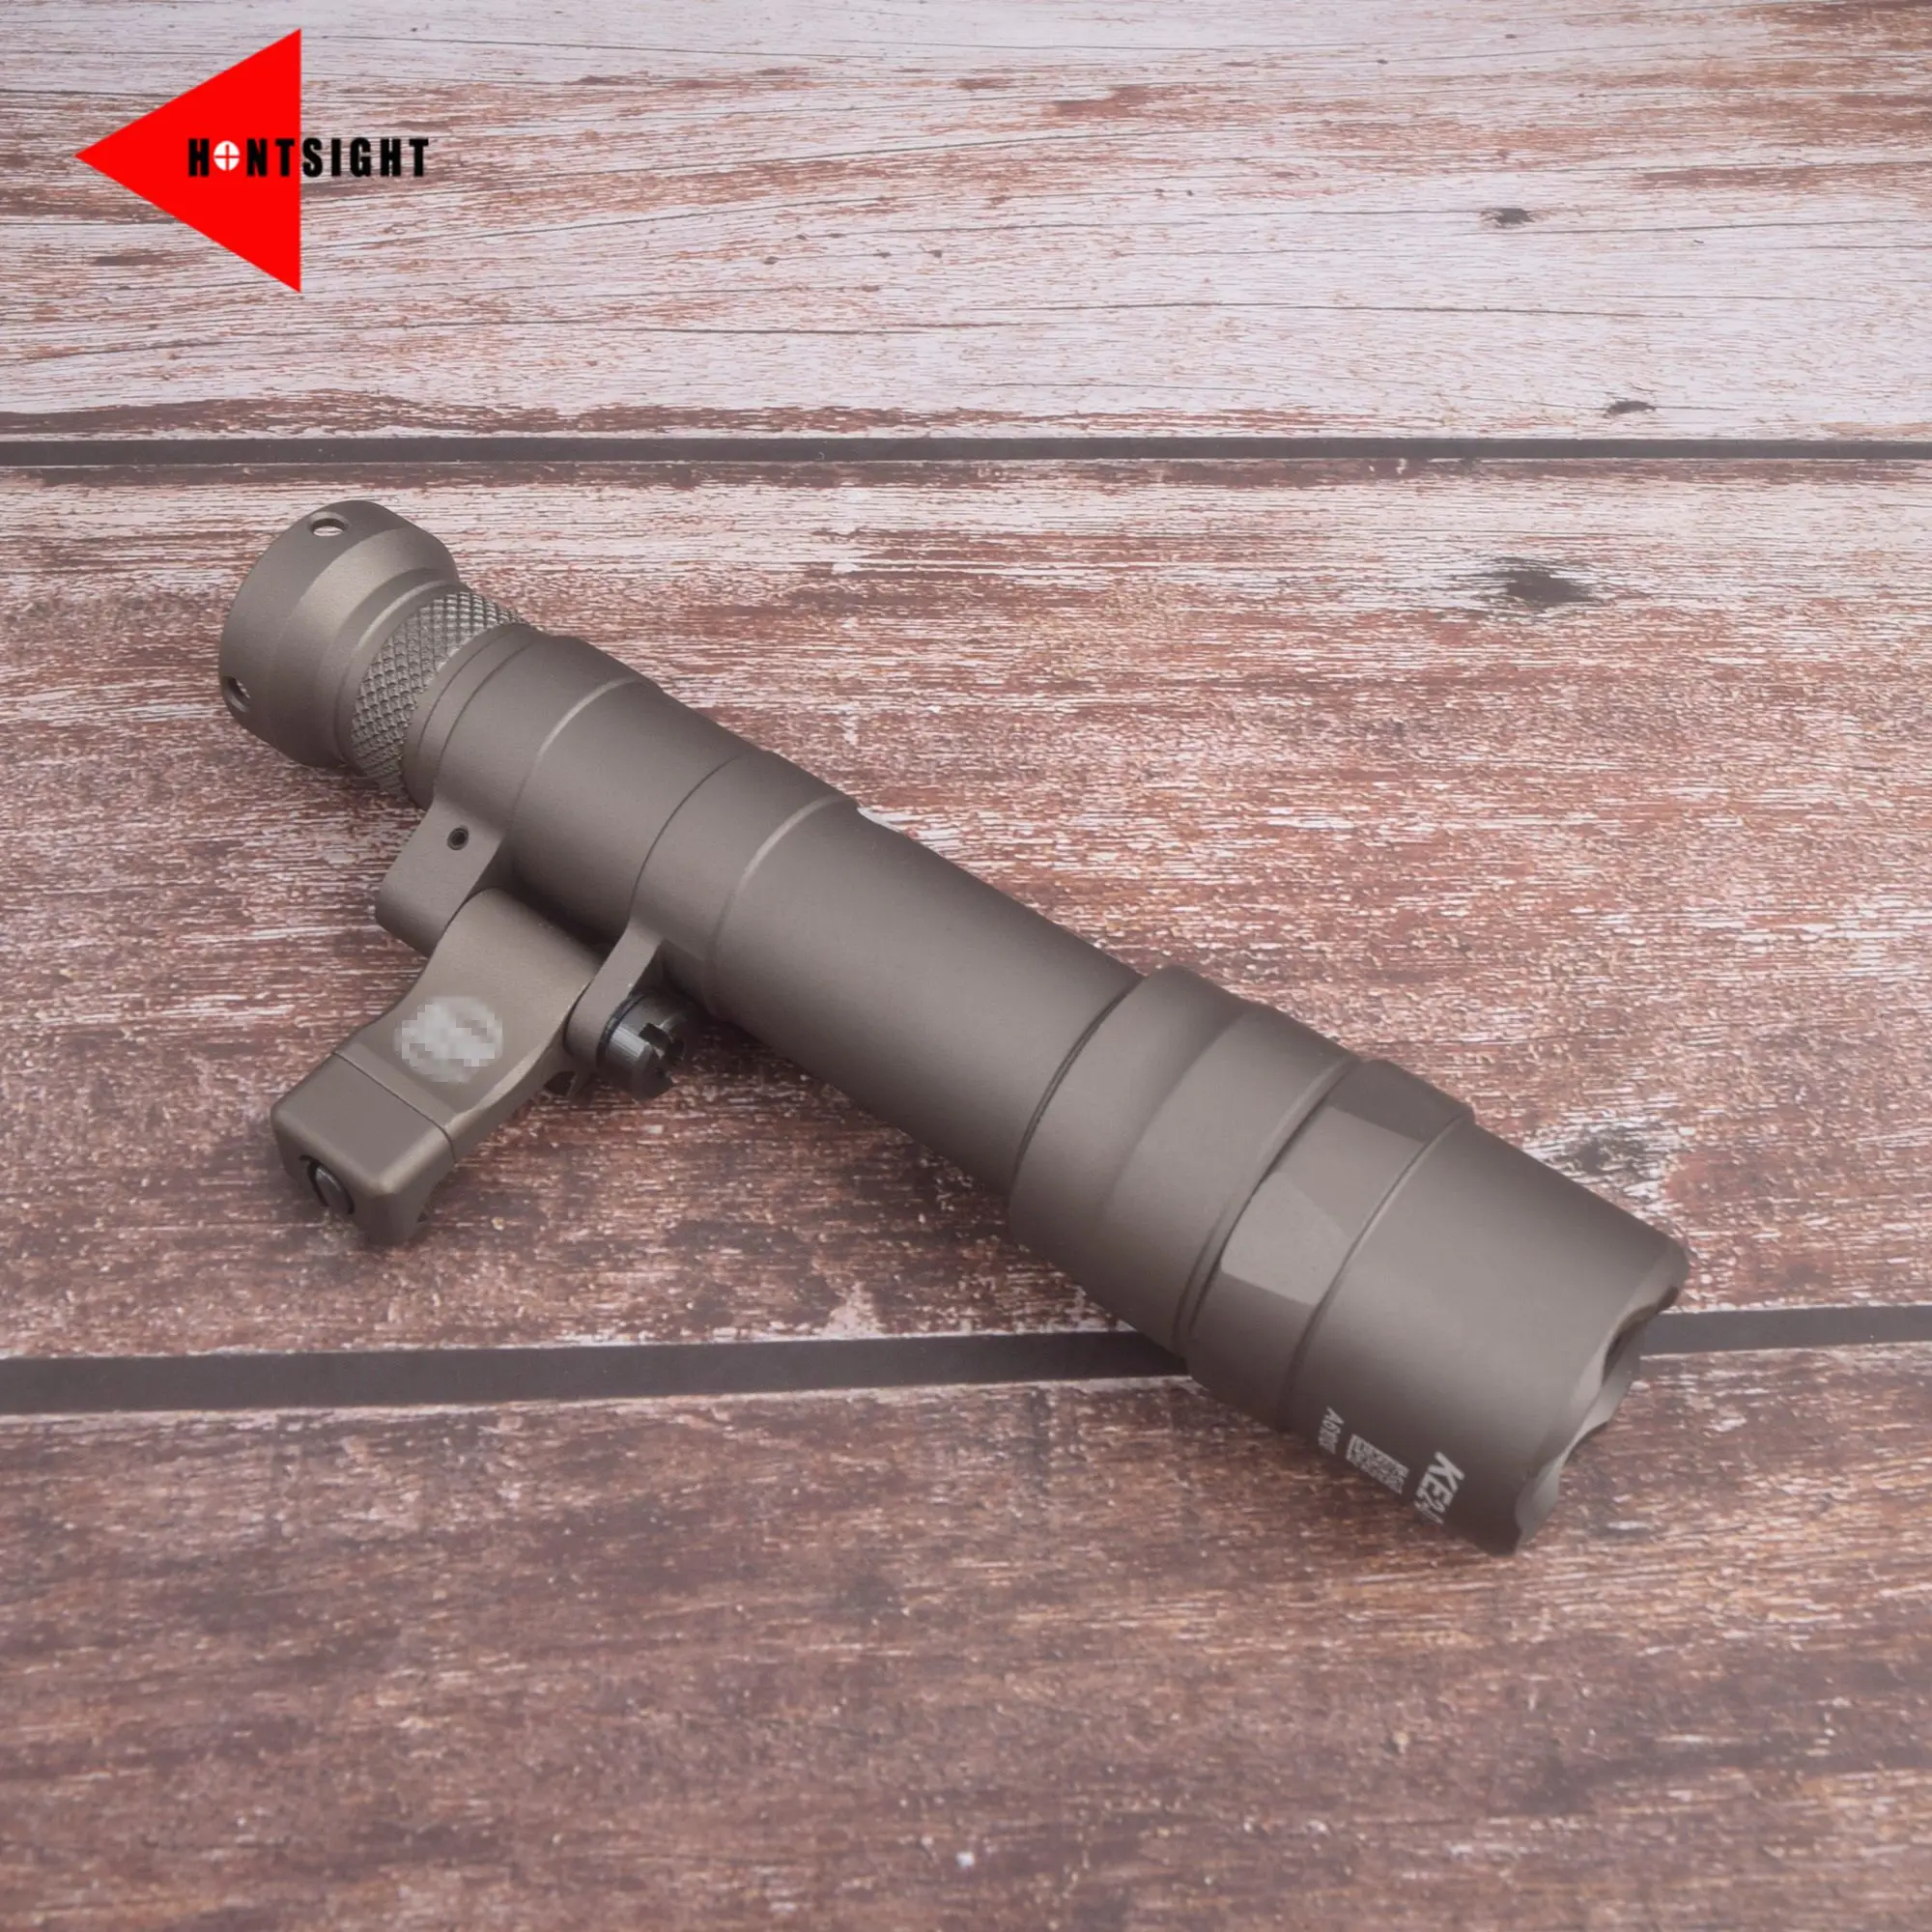 

Tactical SF M640 M640DF Weapon Gun Light For Airsoft Rifle AR15 M16 Flashlight With Offset Mount Fit 20mm Pictinny Rail